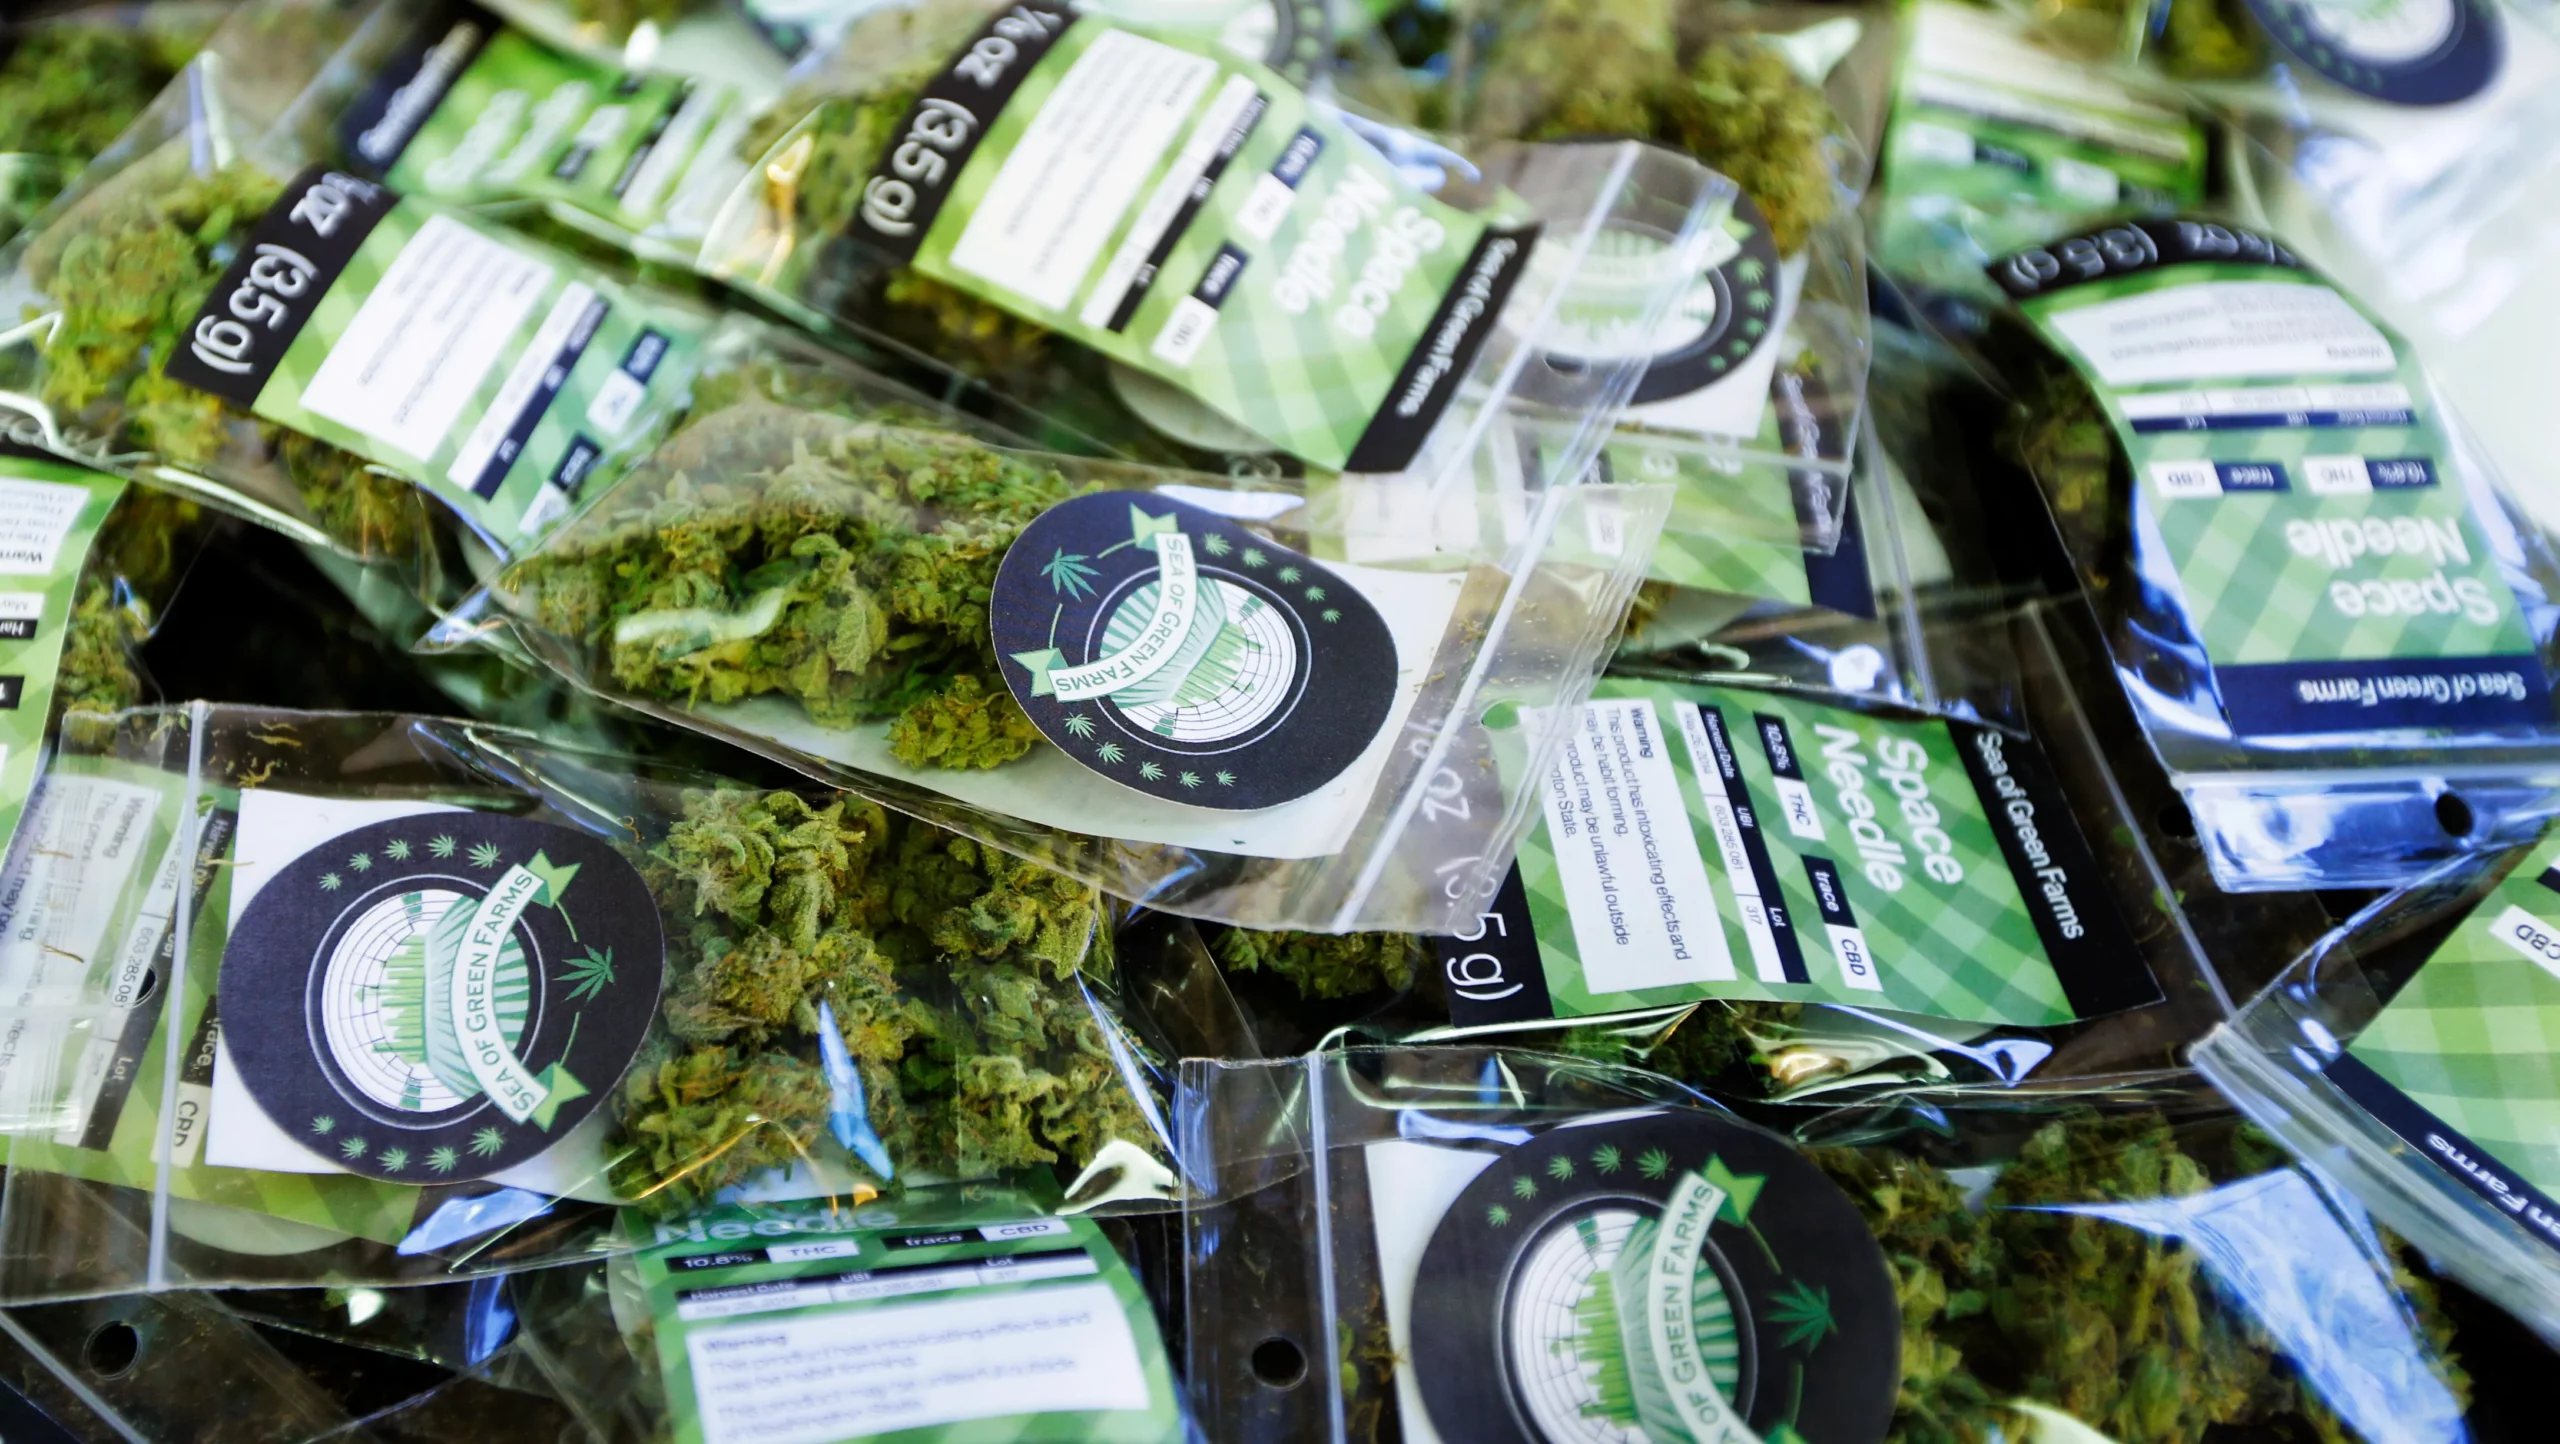 Washington State Legal Weed Sales Have Declined for the First Ever Time Since Legalization